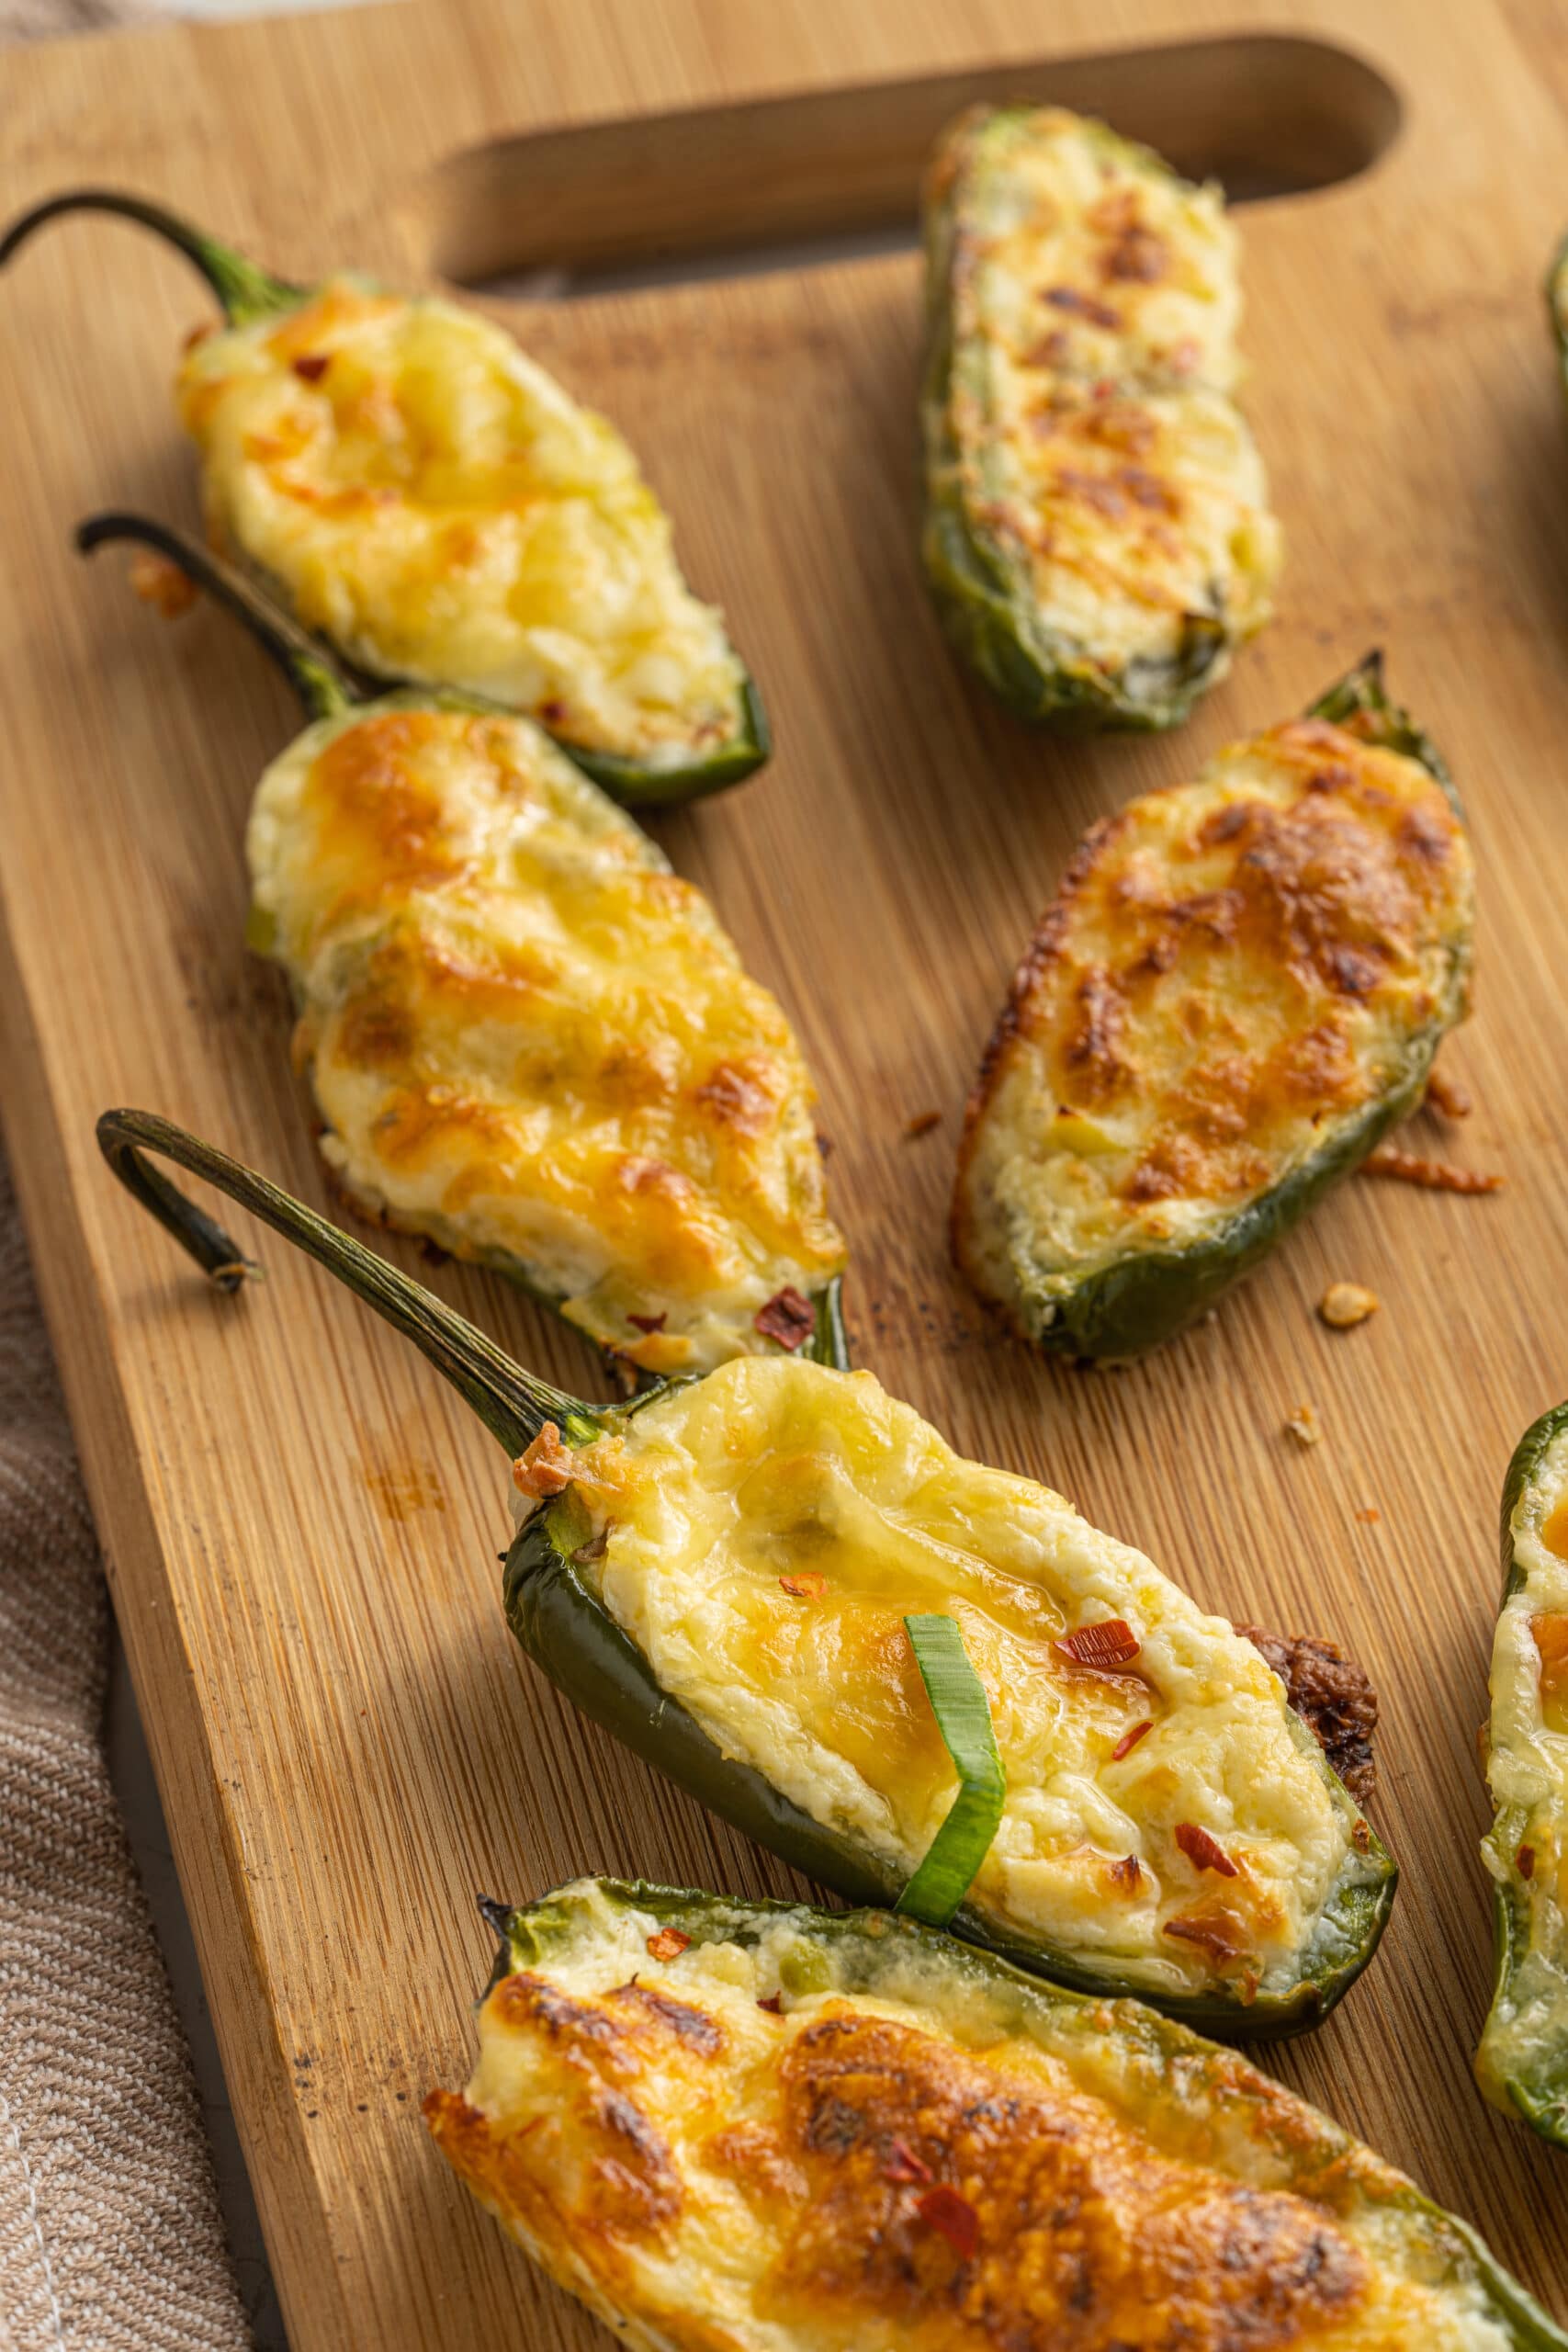 Cooked jalapeño poppers recipe with browned melted cheese on top on a wooden cutting board.